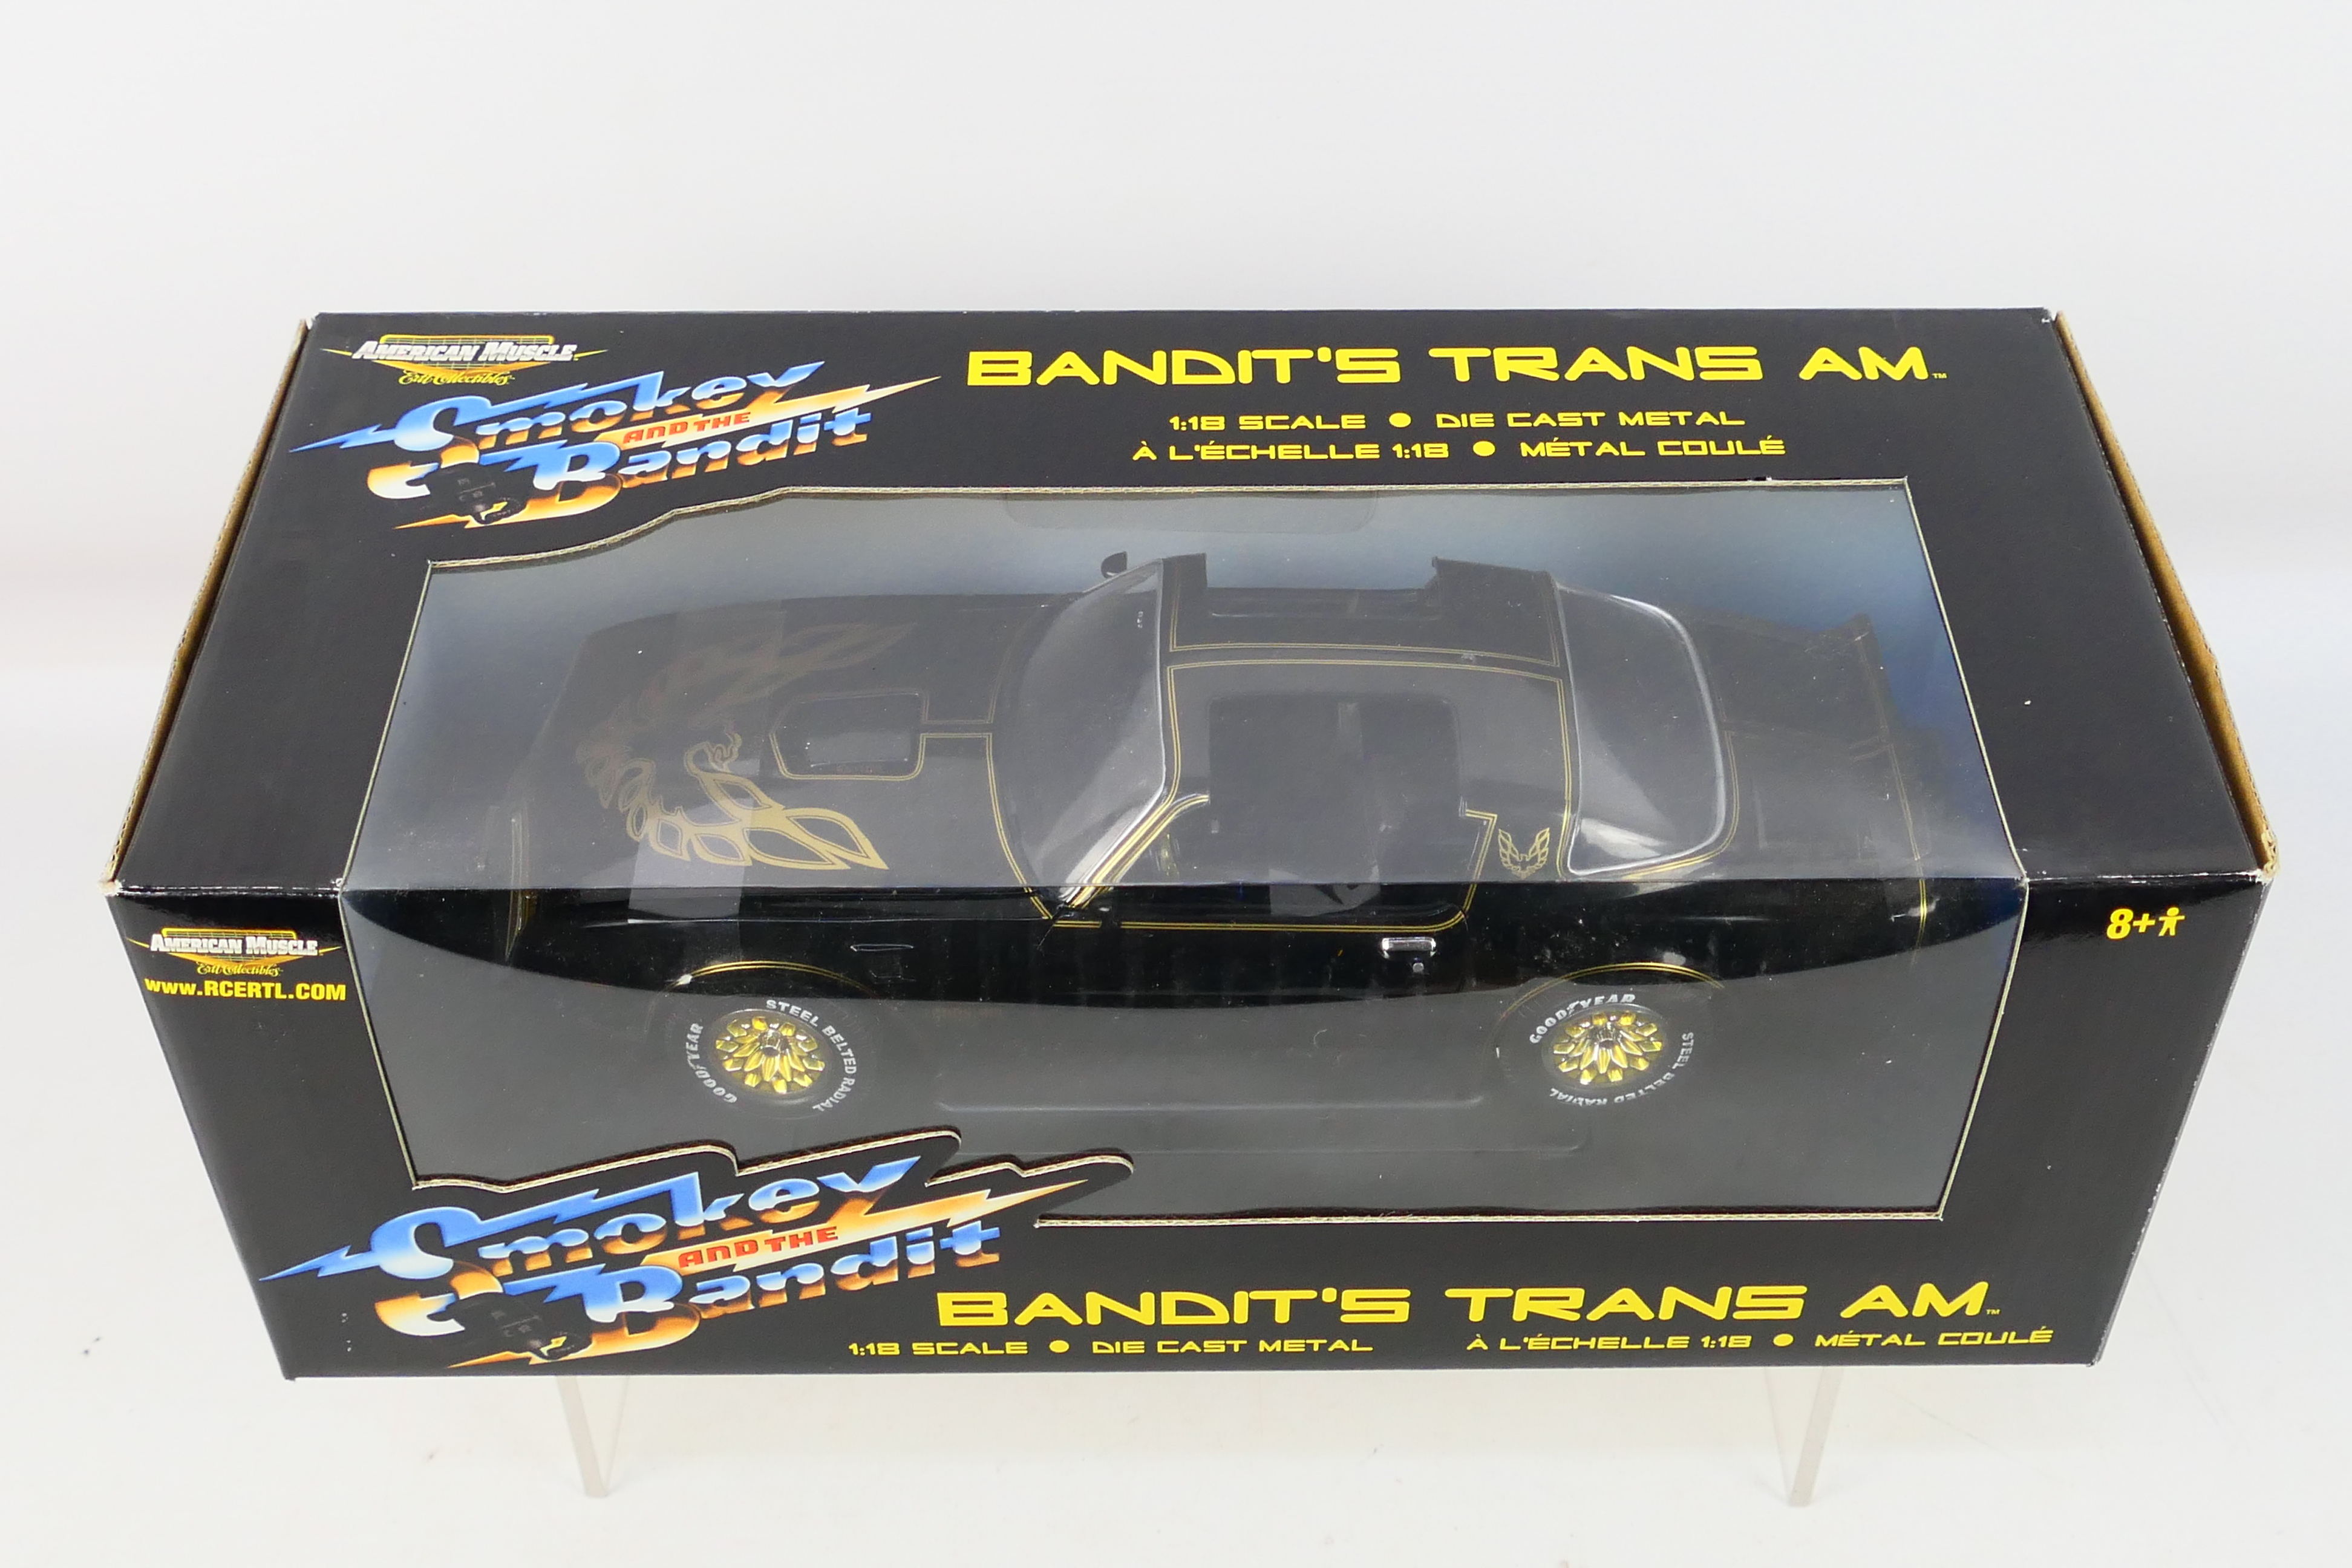 Ertl - A boxed 1:18 scale Ertl 'American Muscle' #33131 'Smokey and The Bandit' Bandit's Trans Am. - Image 3 of 5